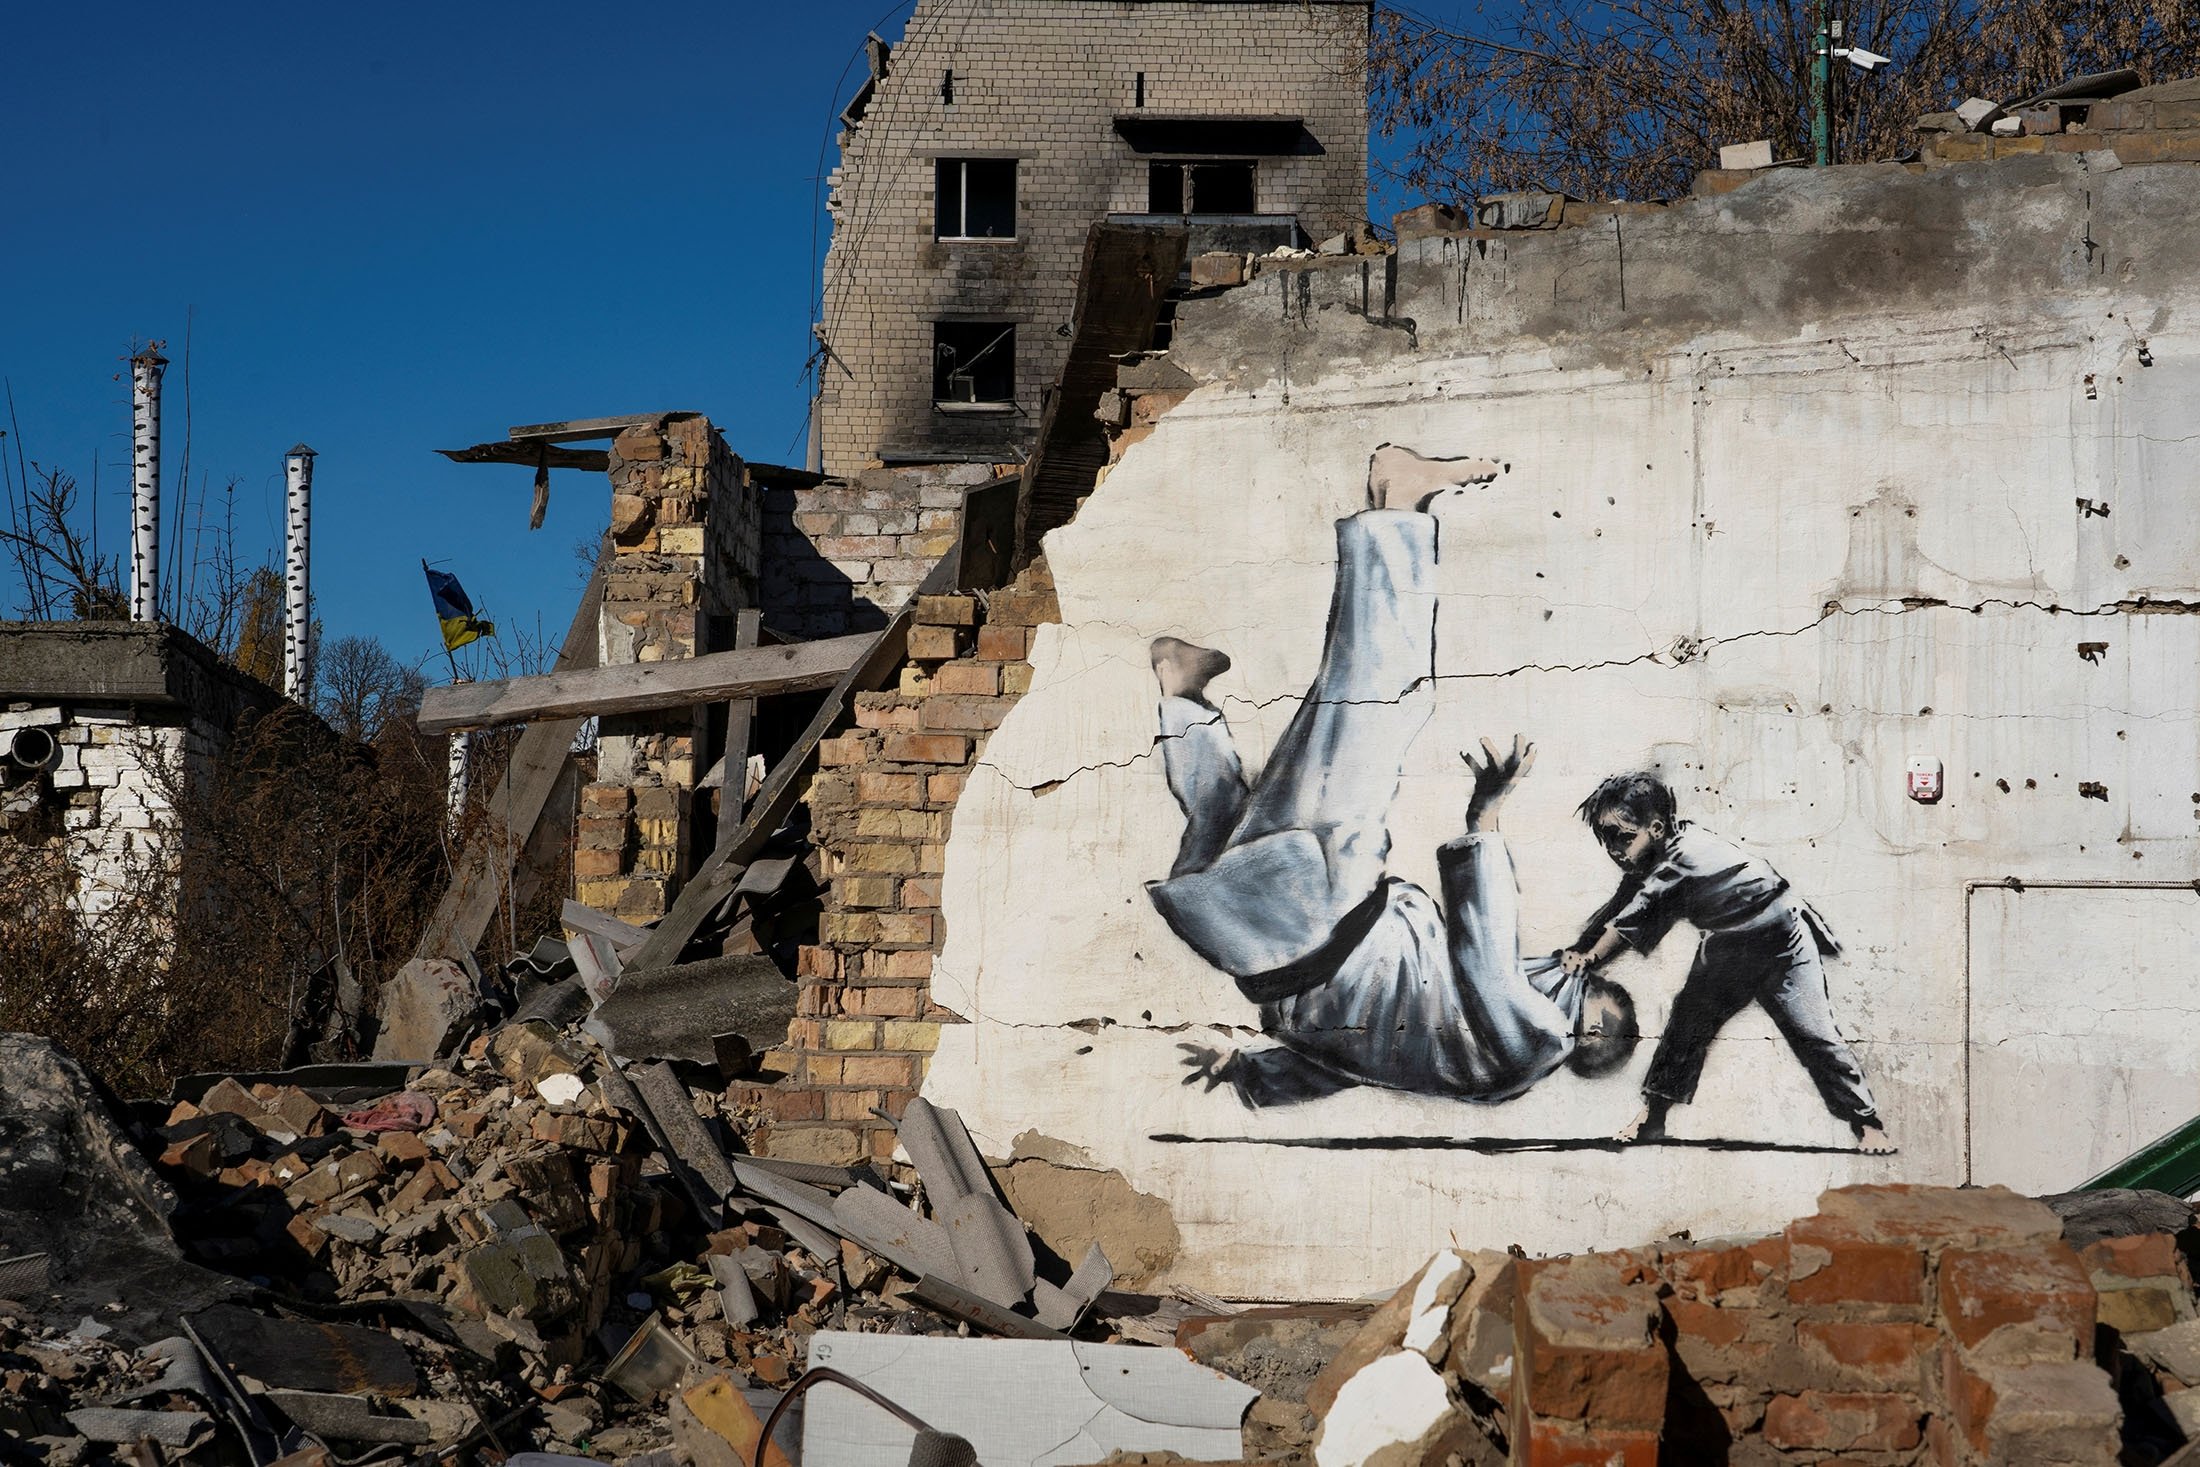 Banksy unveils new graffiti in bombed-out Ukrainian town